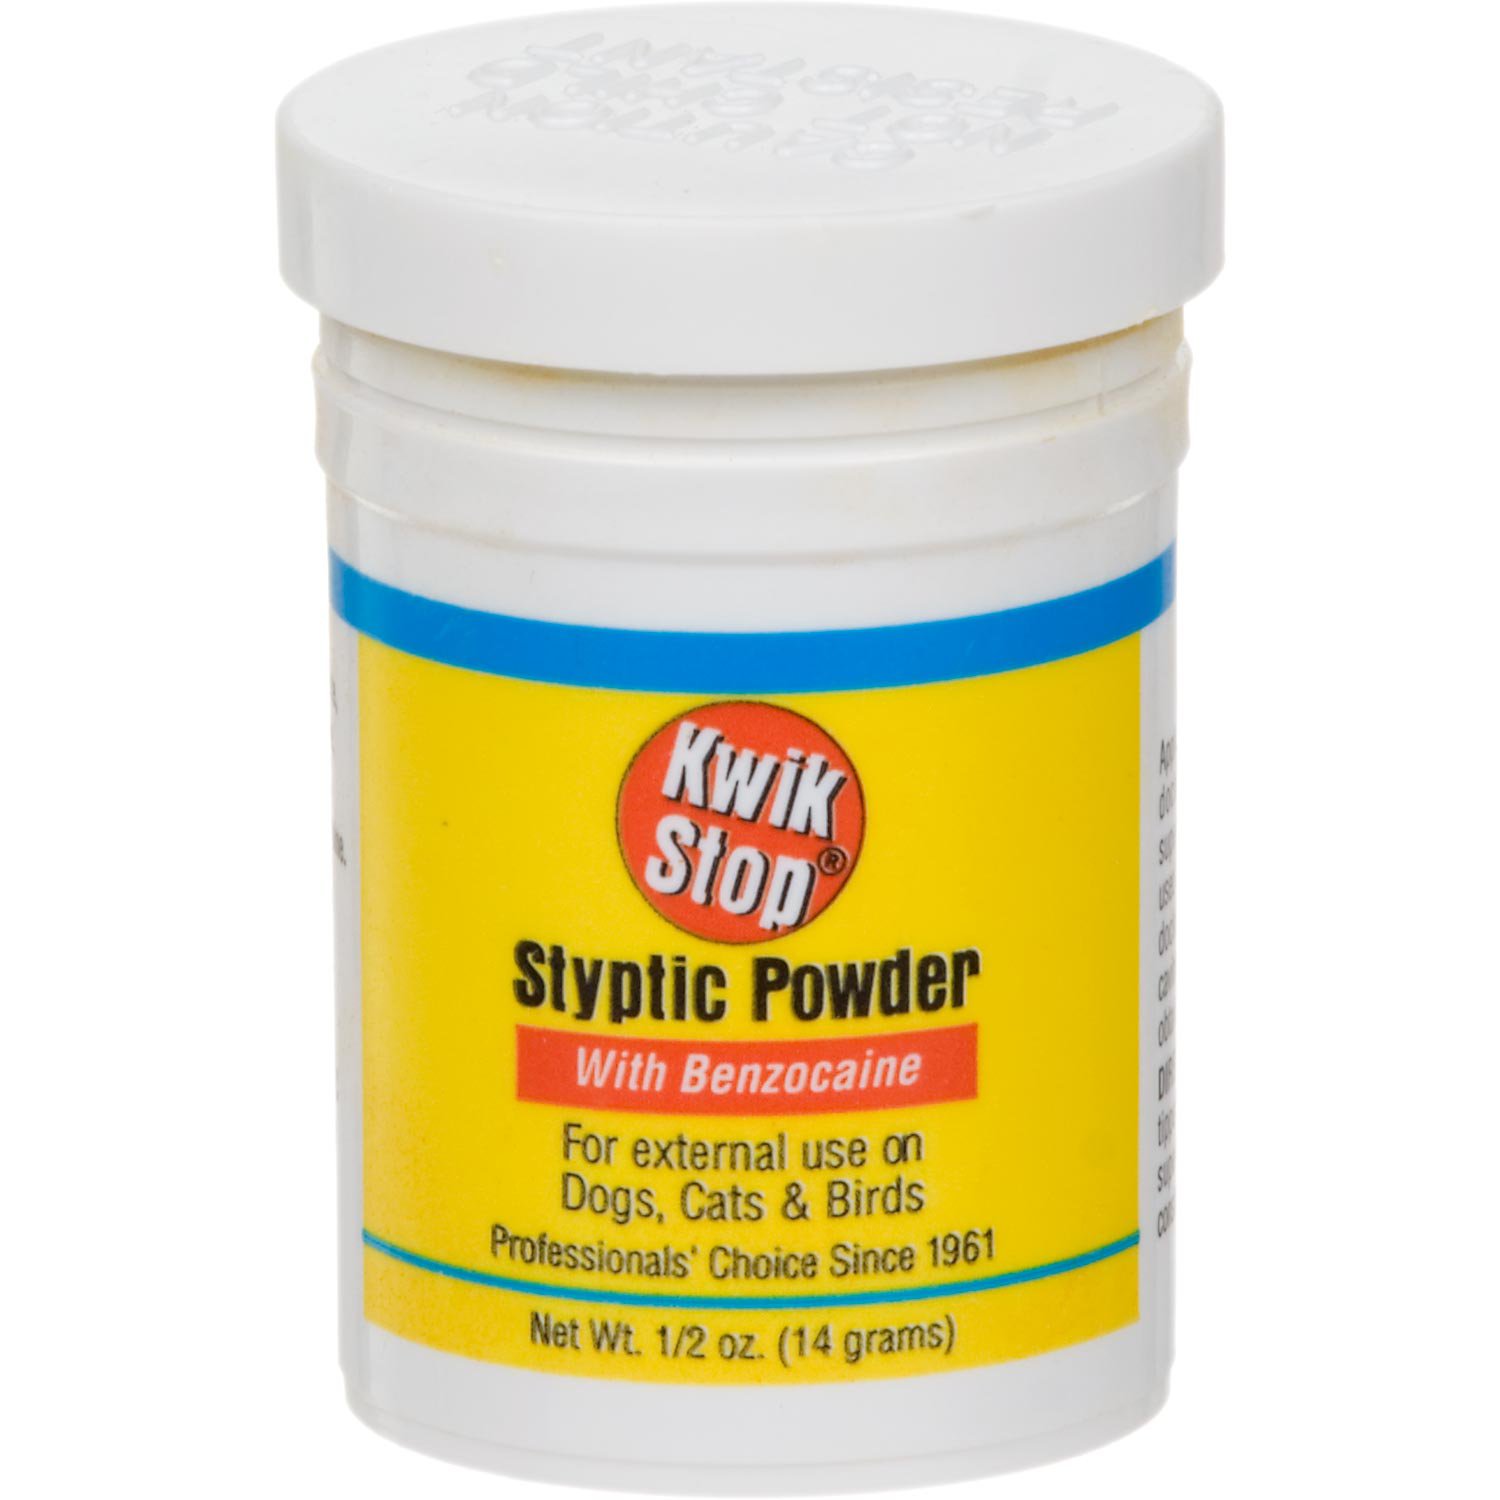 powder for clipping dog nails